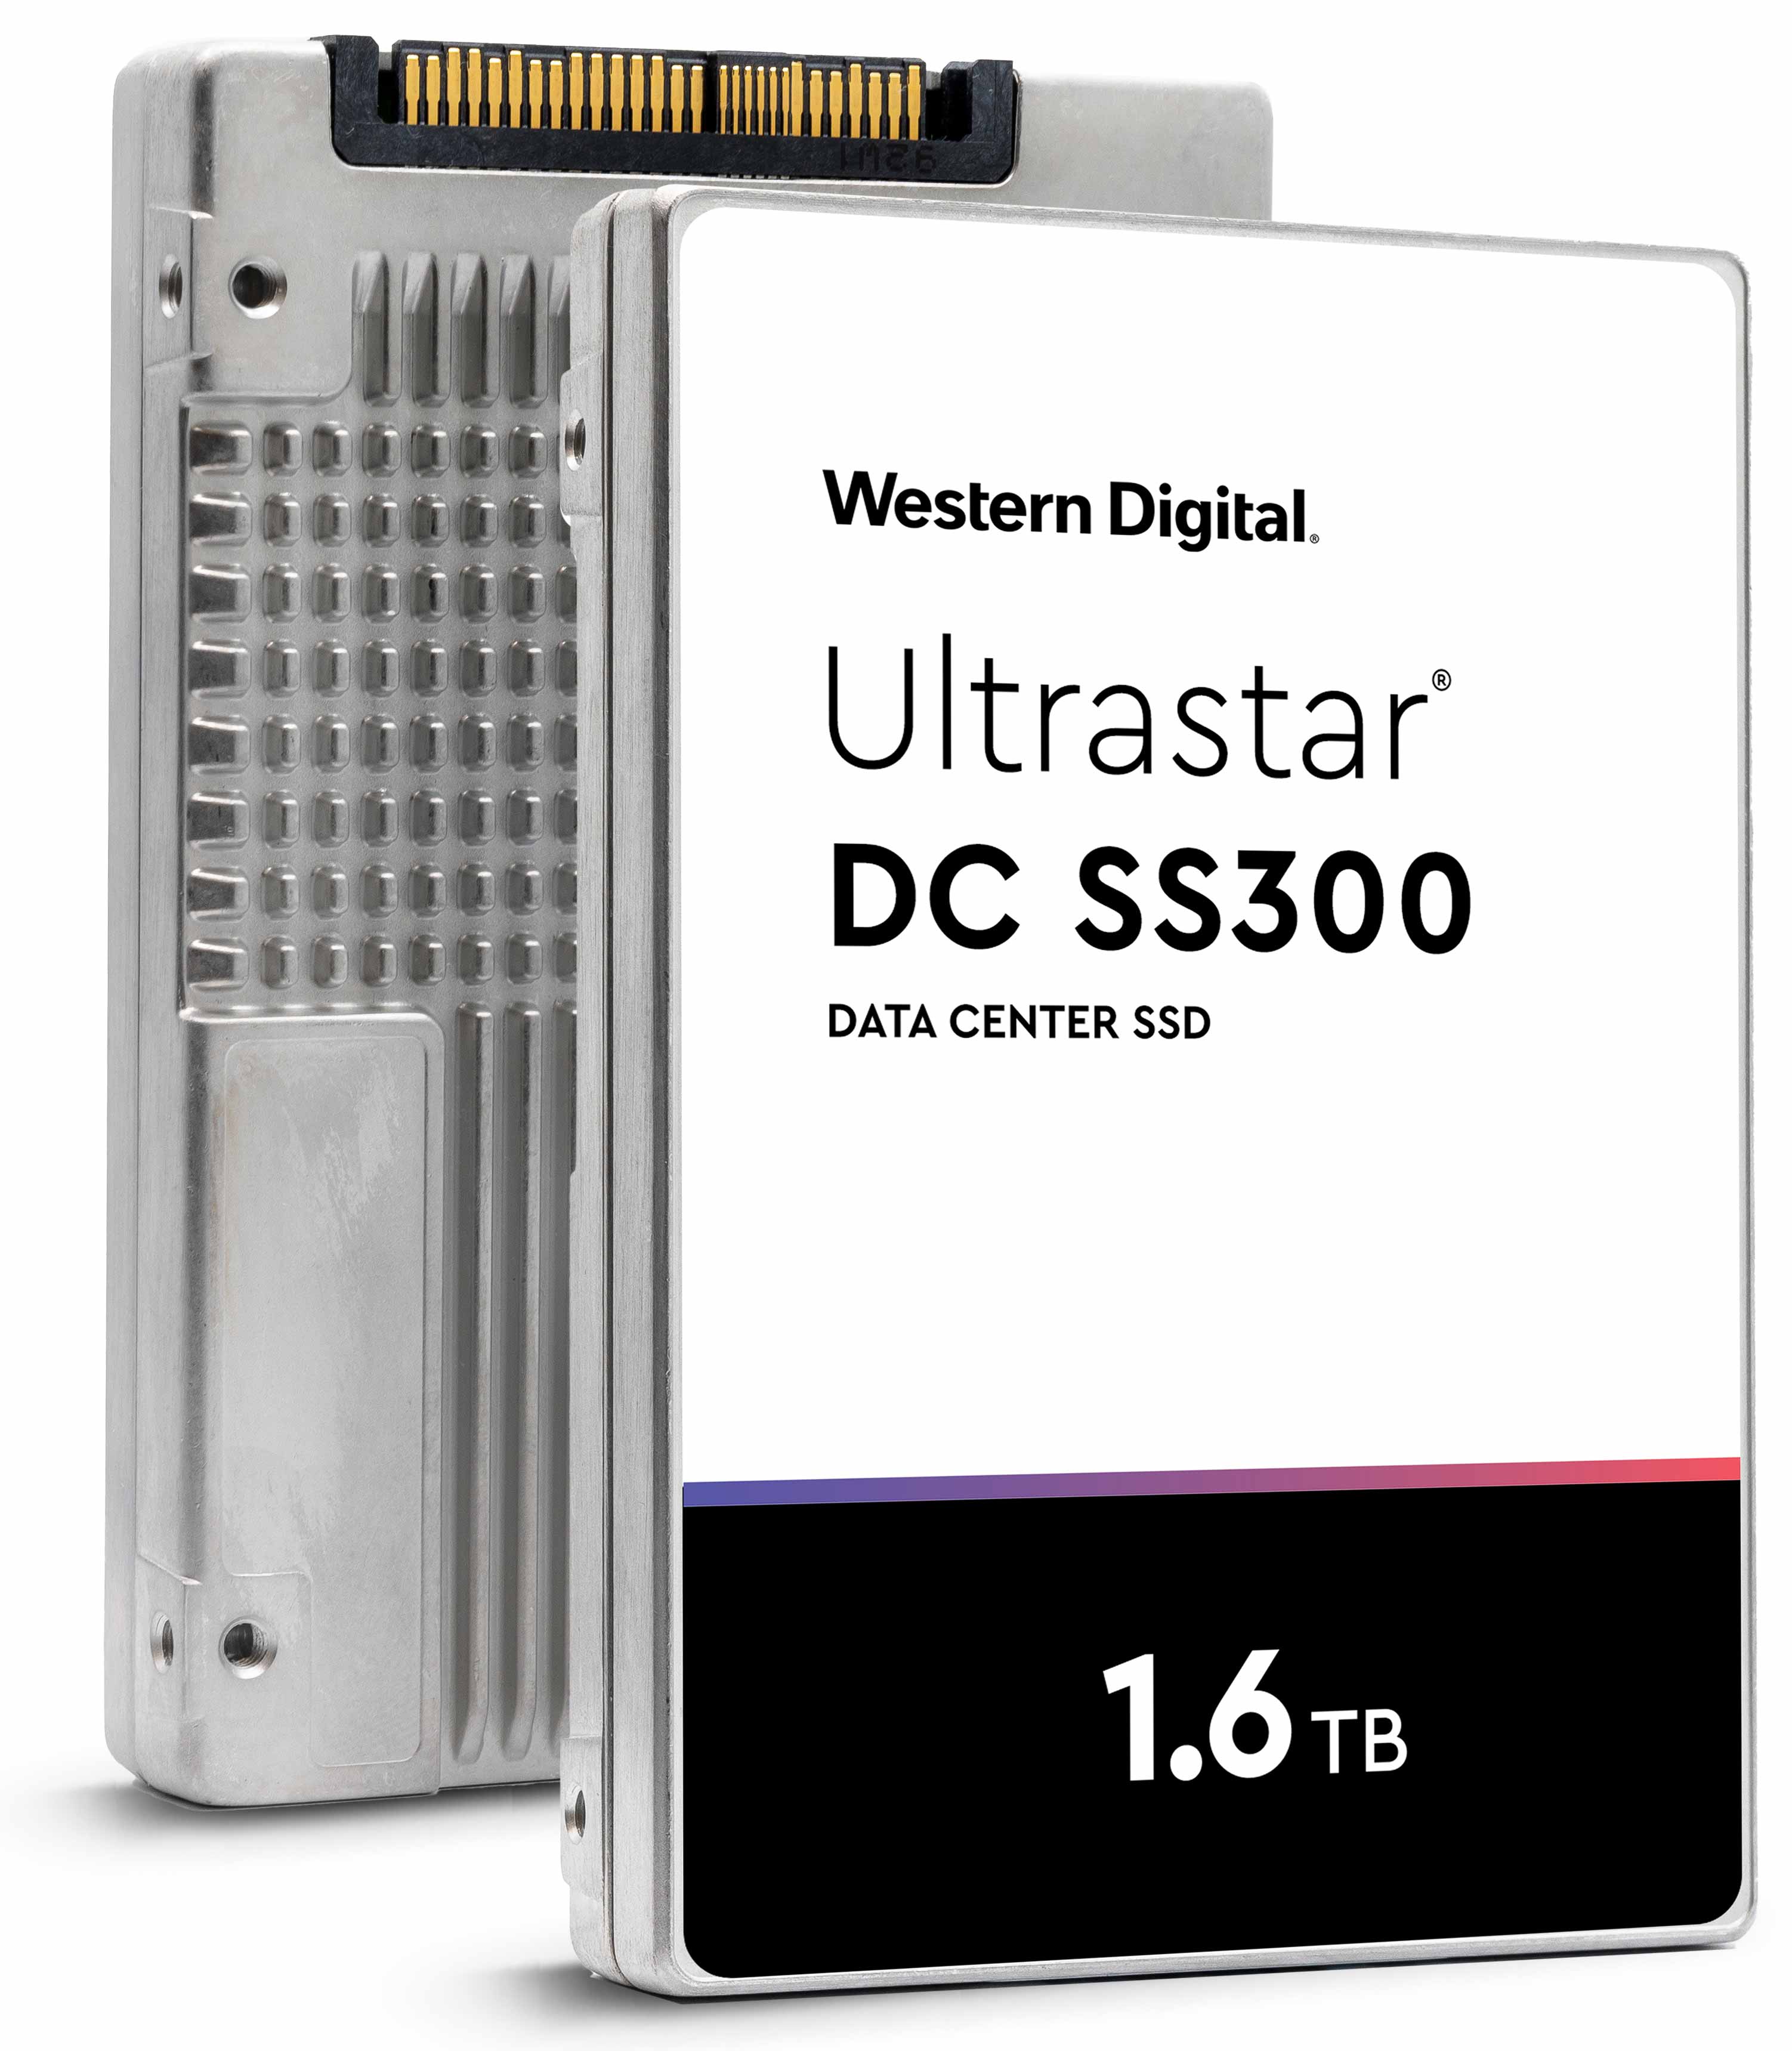 Western Digital DC SS300 HUSMM3216ASS204 1.6TB SAS 12Gb/s 512e 2.5in Recertified Solid State Drive